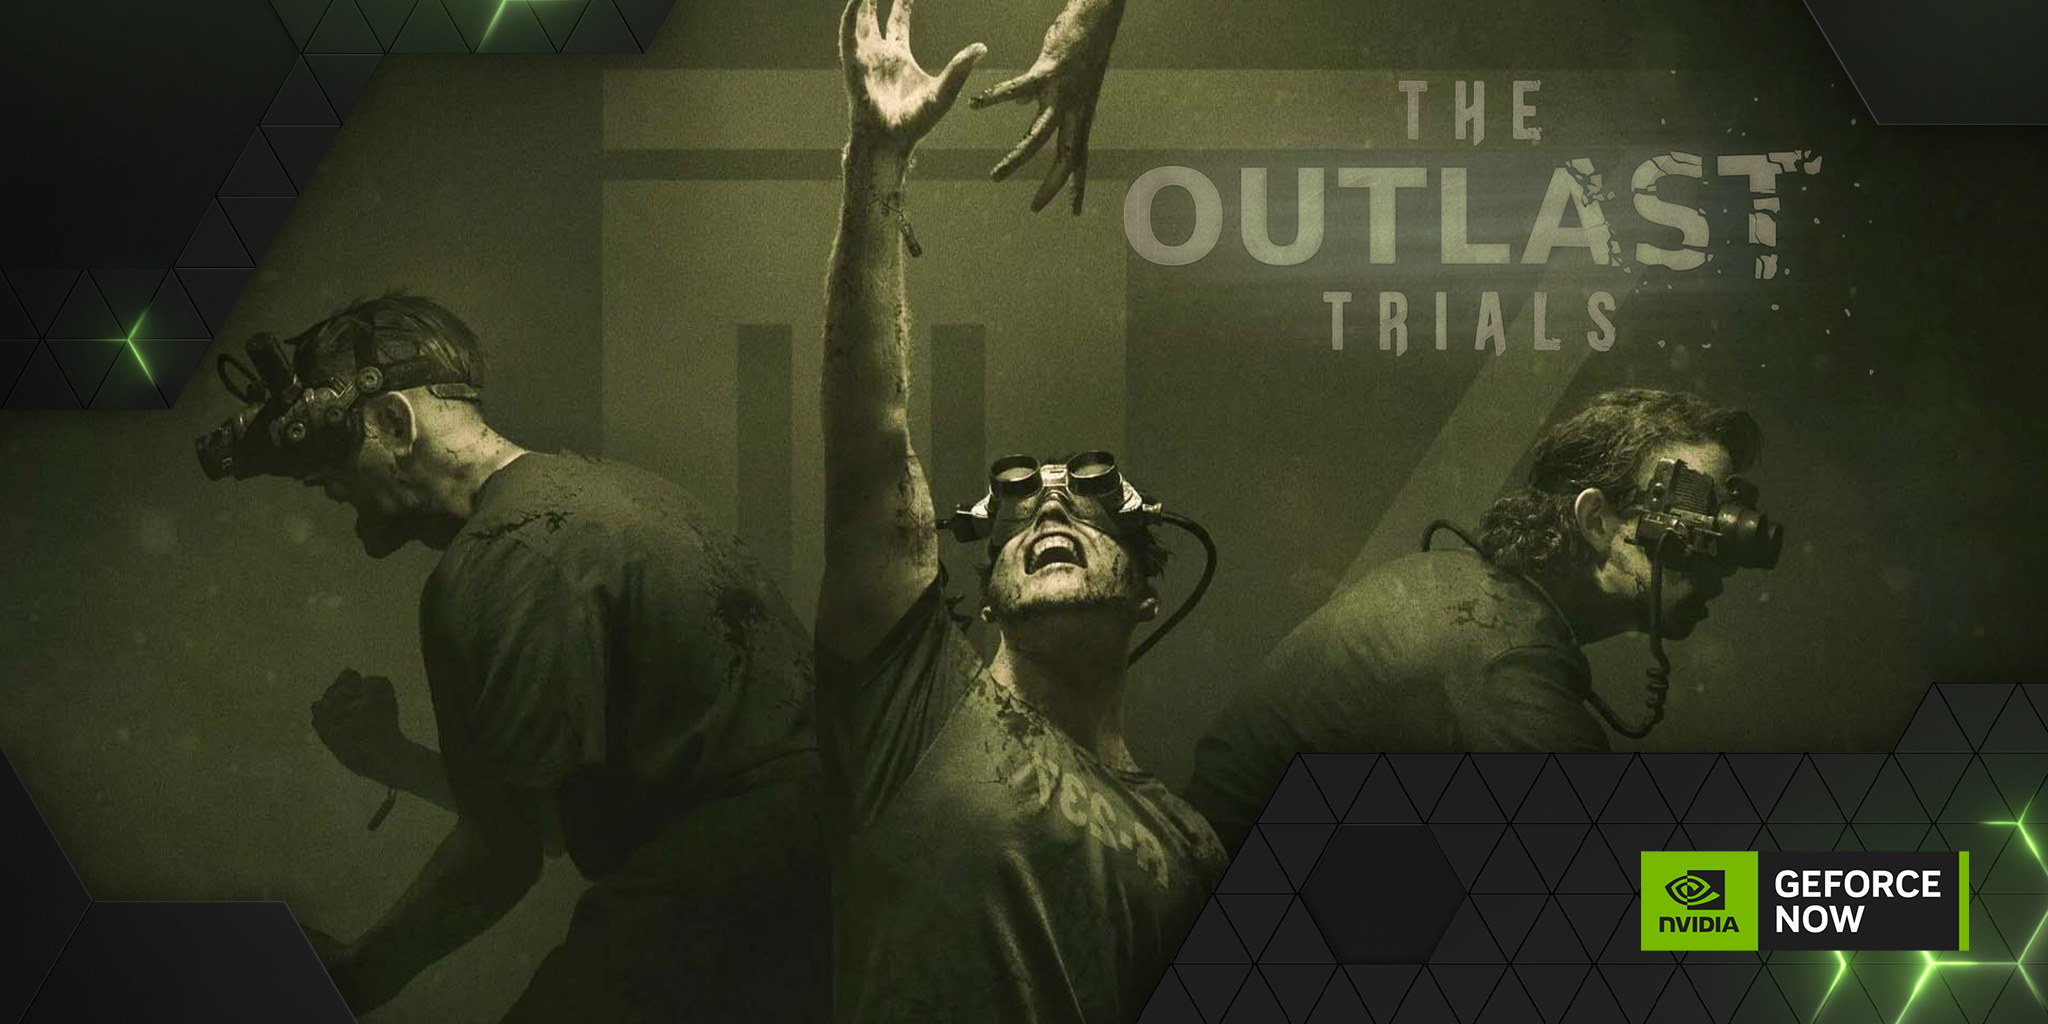 Can you play The Outlast Trials on cloud gaming services?